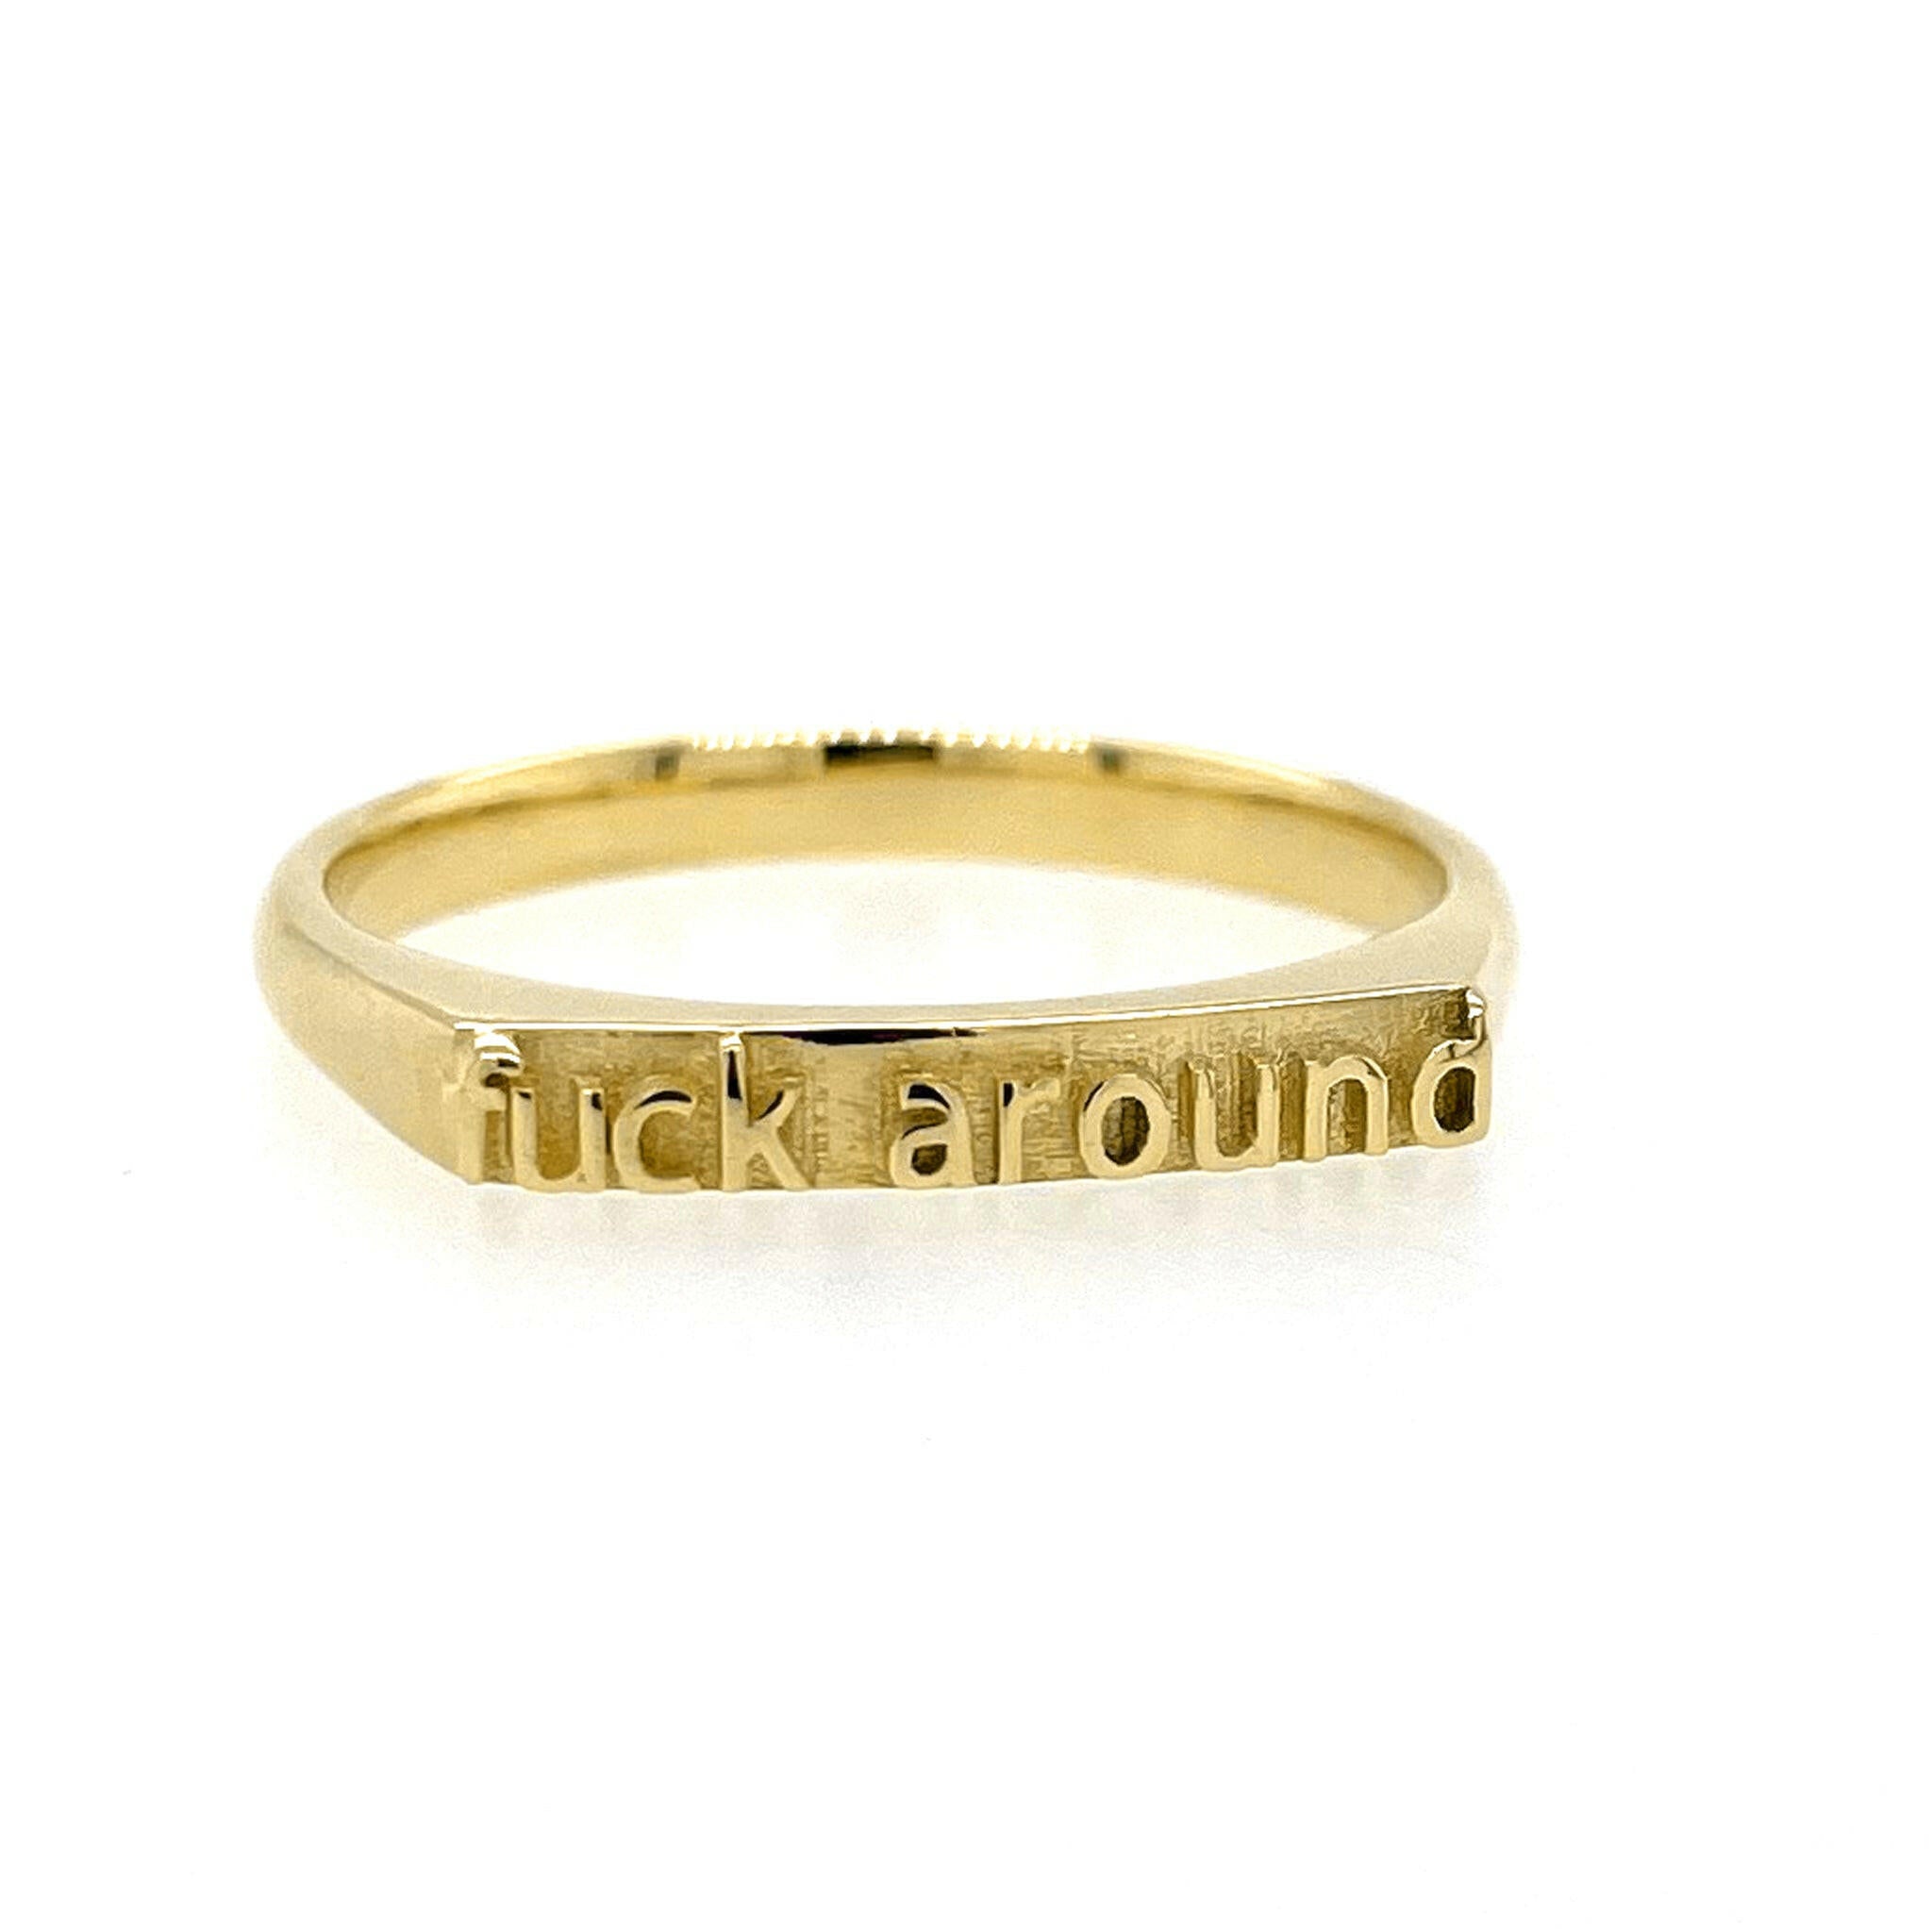 Front view of 14 Karat Gold ring that reads "fuck around" in text.